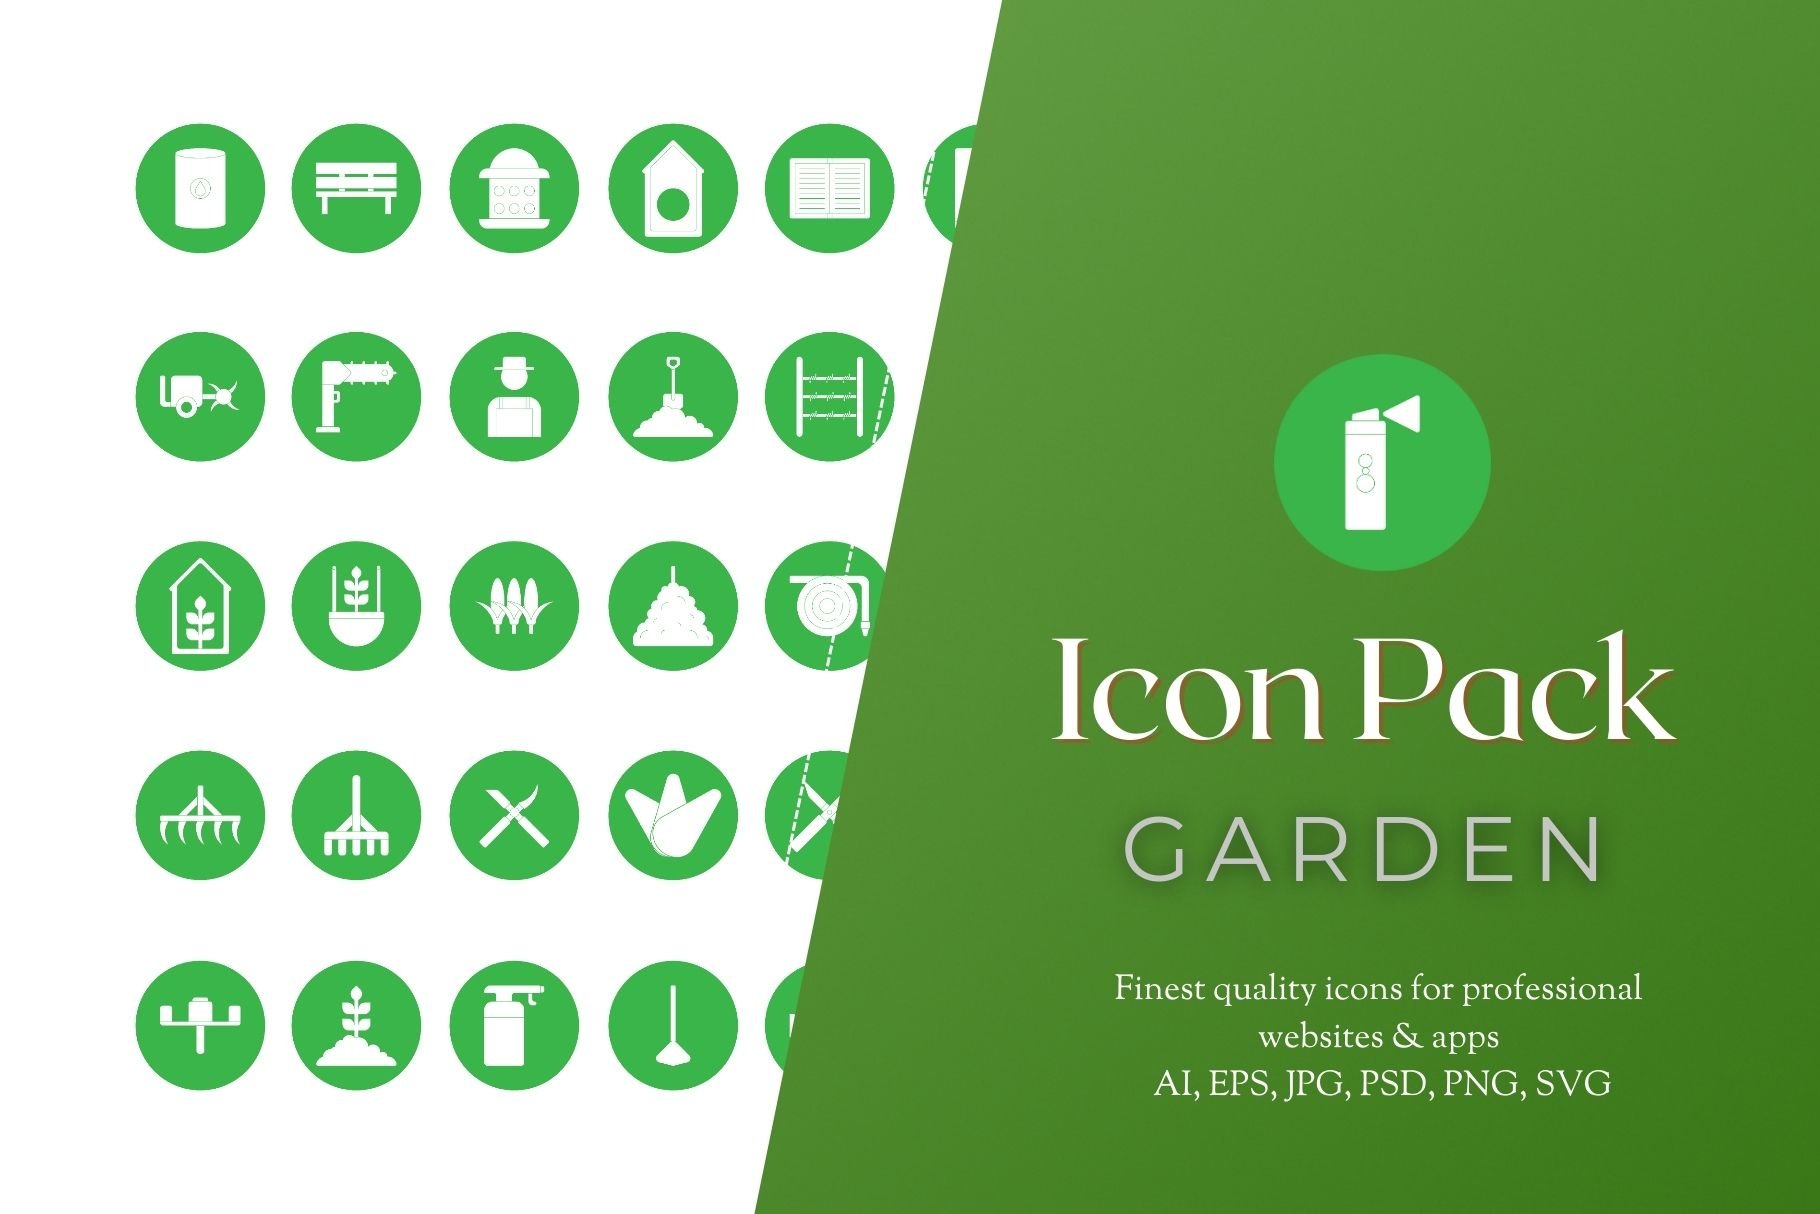 Icon Pack: 50 Garden Icons cover image.